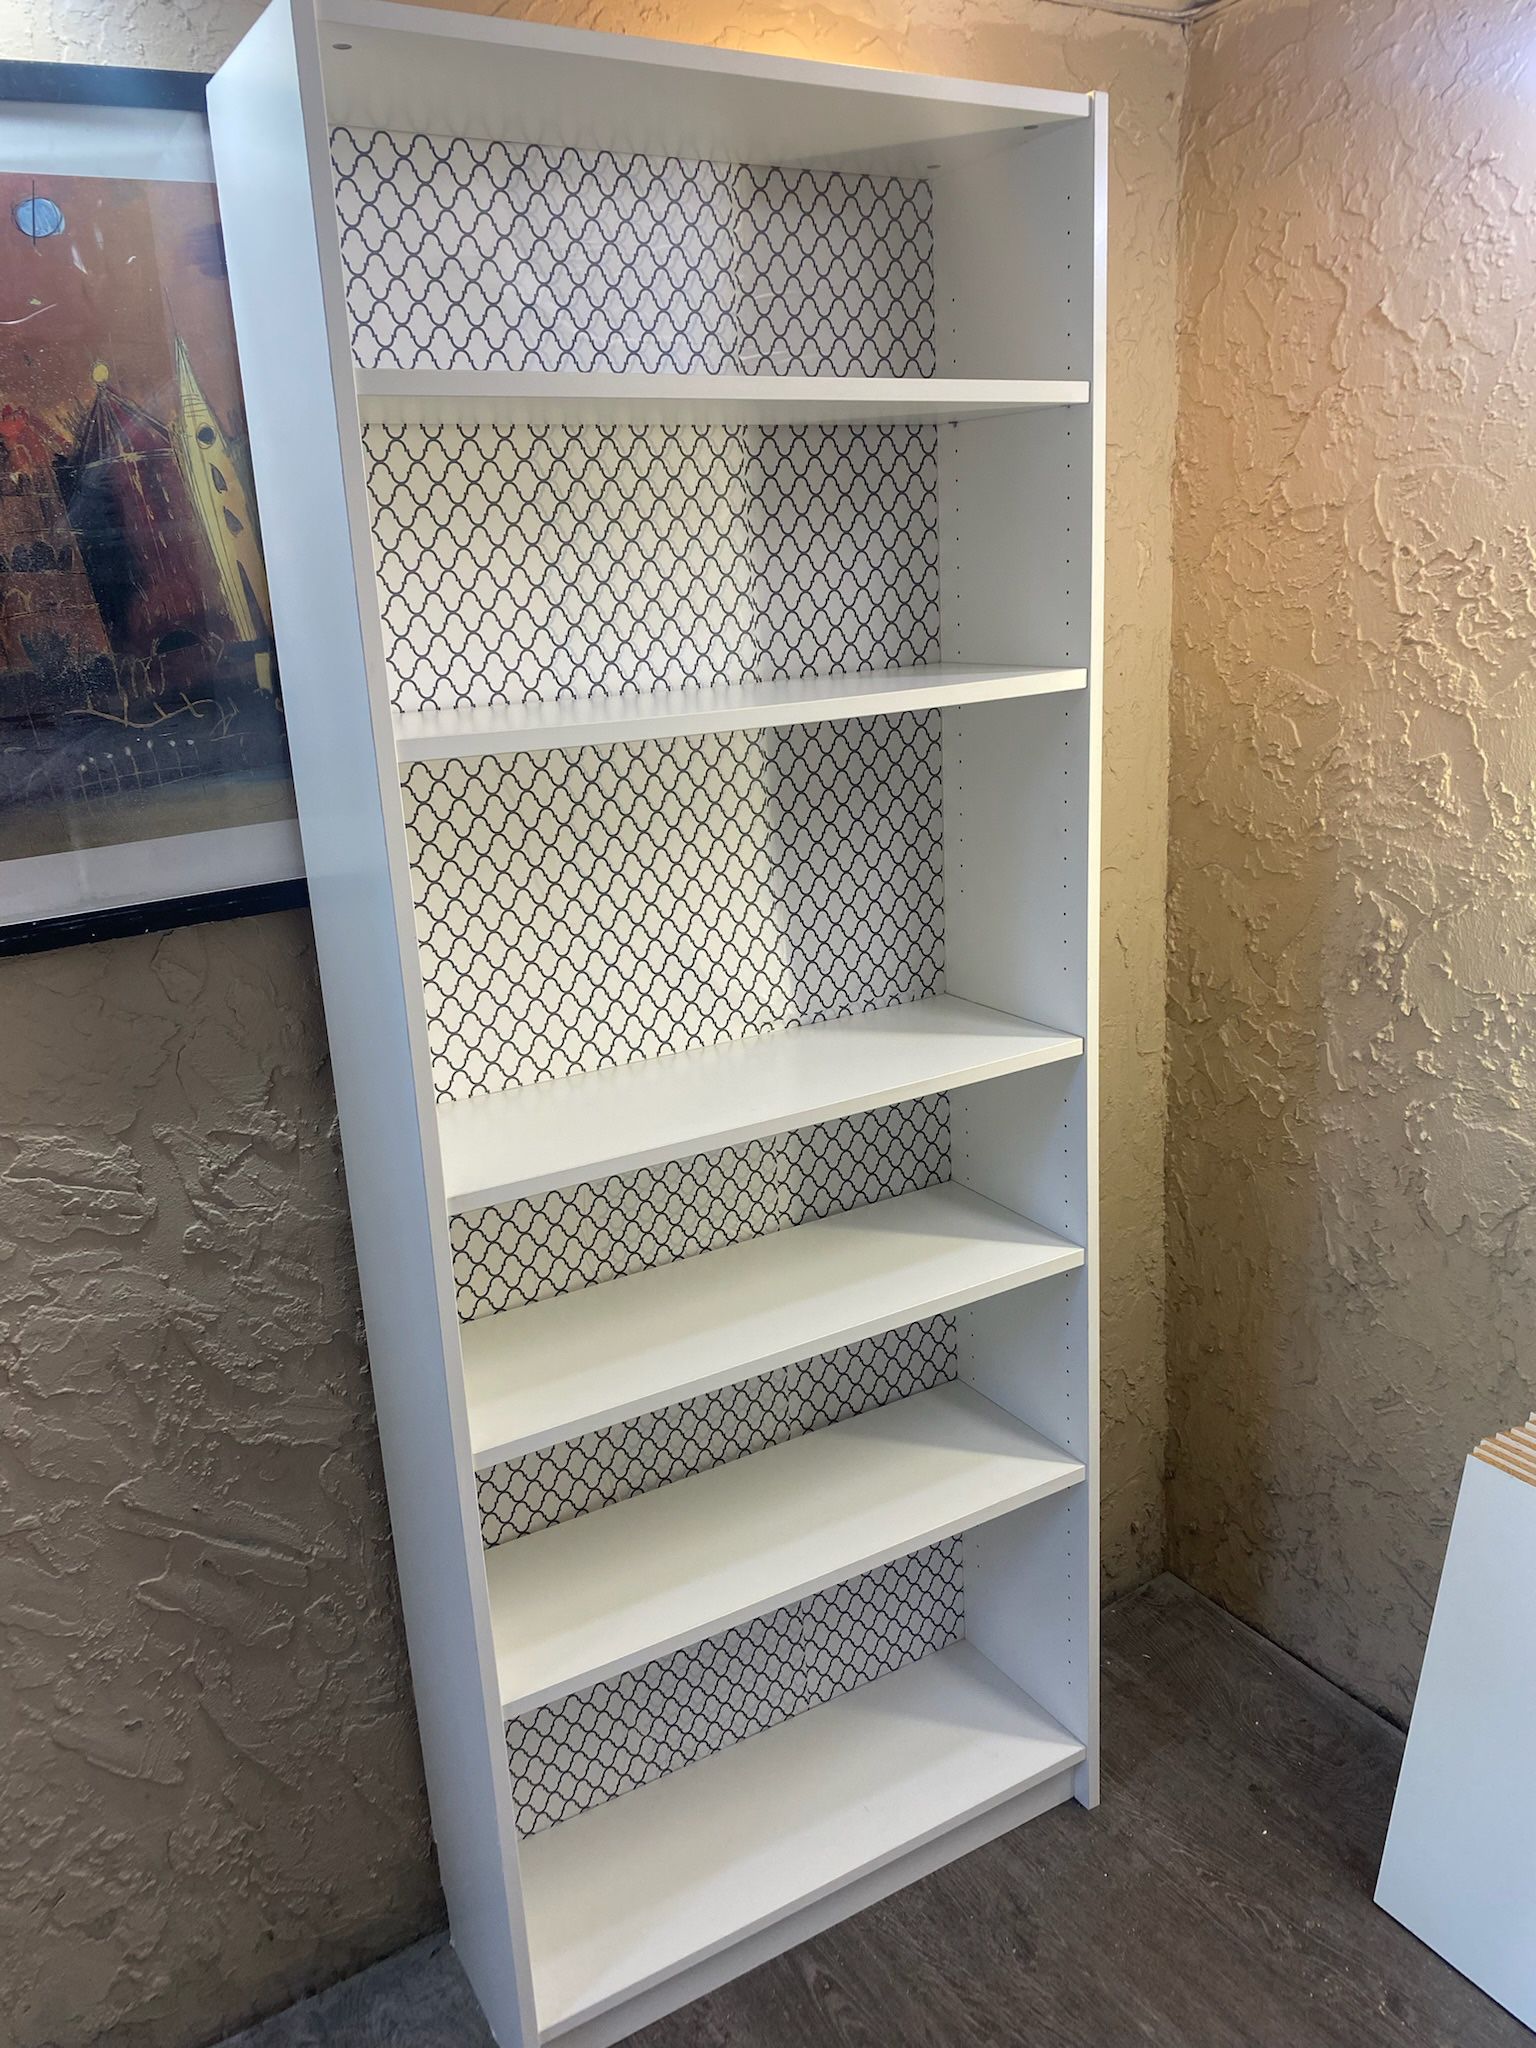 TALL WHITE Bookcase with Adjustable Shelves 6.5 Feet Tall - Local Delivery for a Fee - See My Items